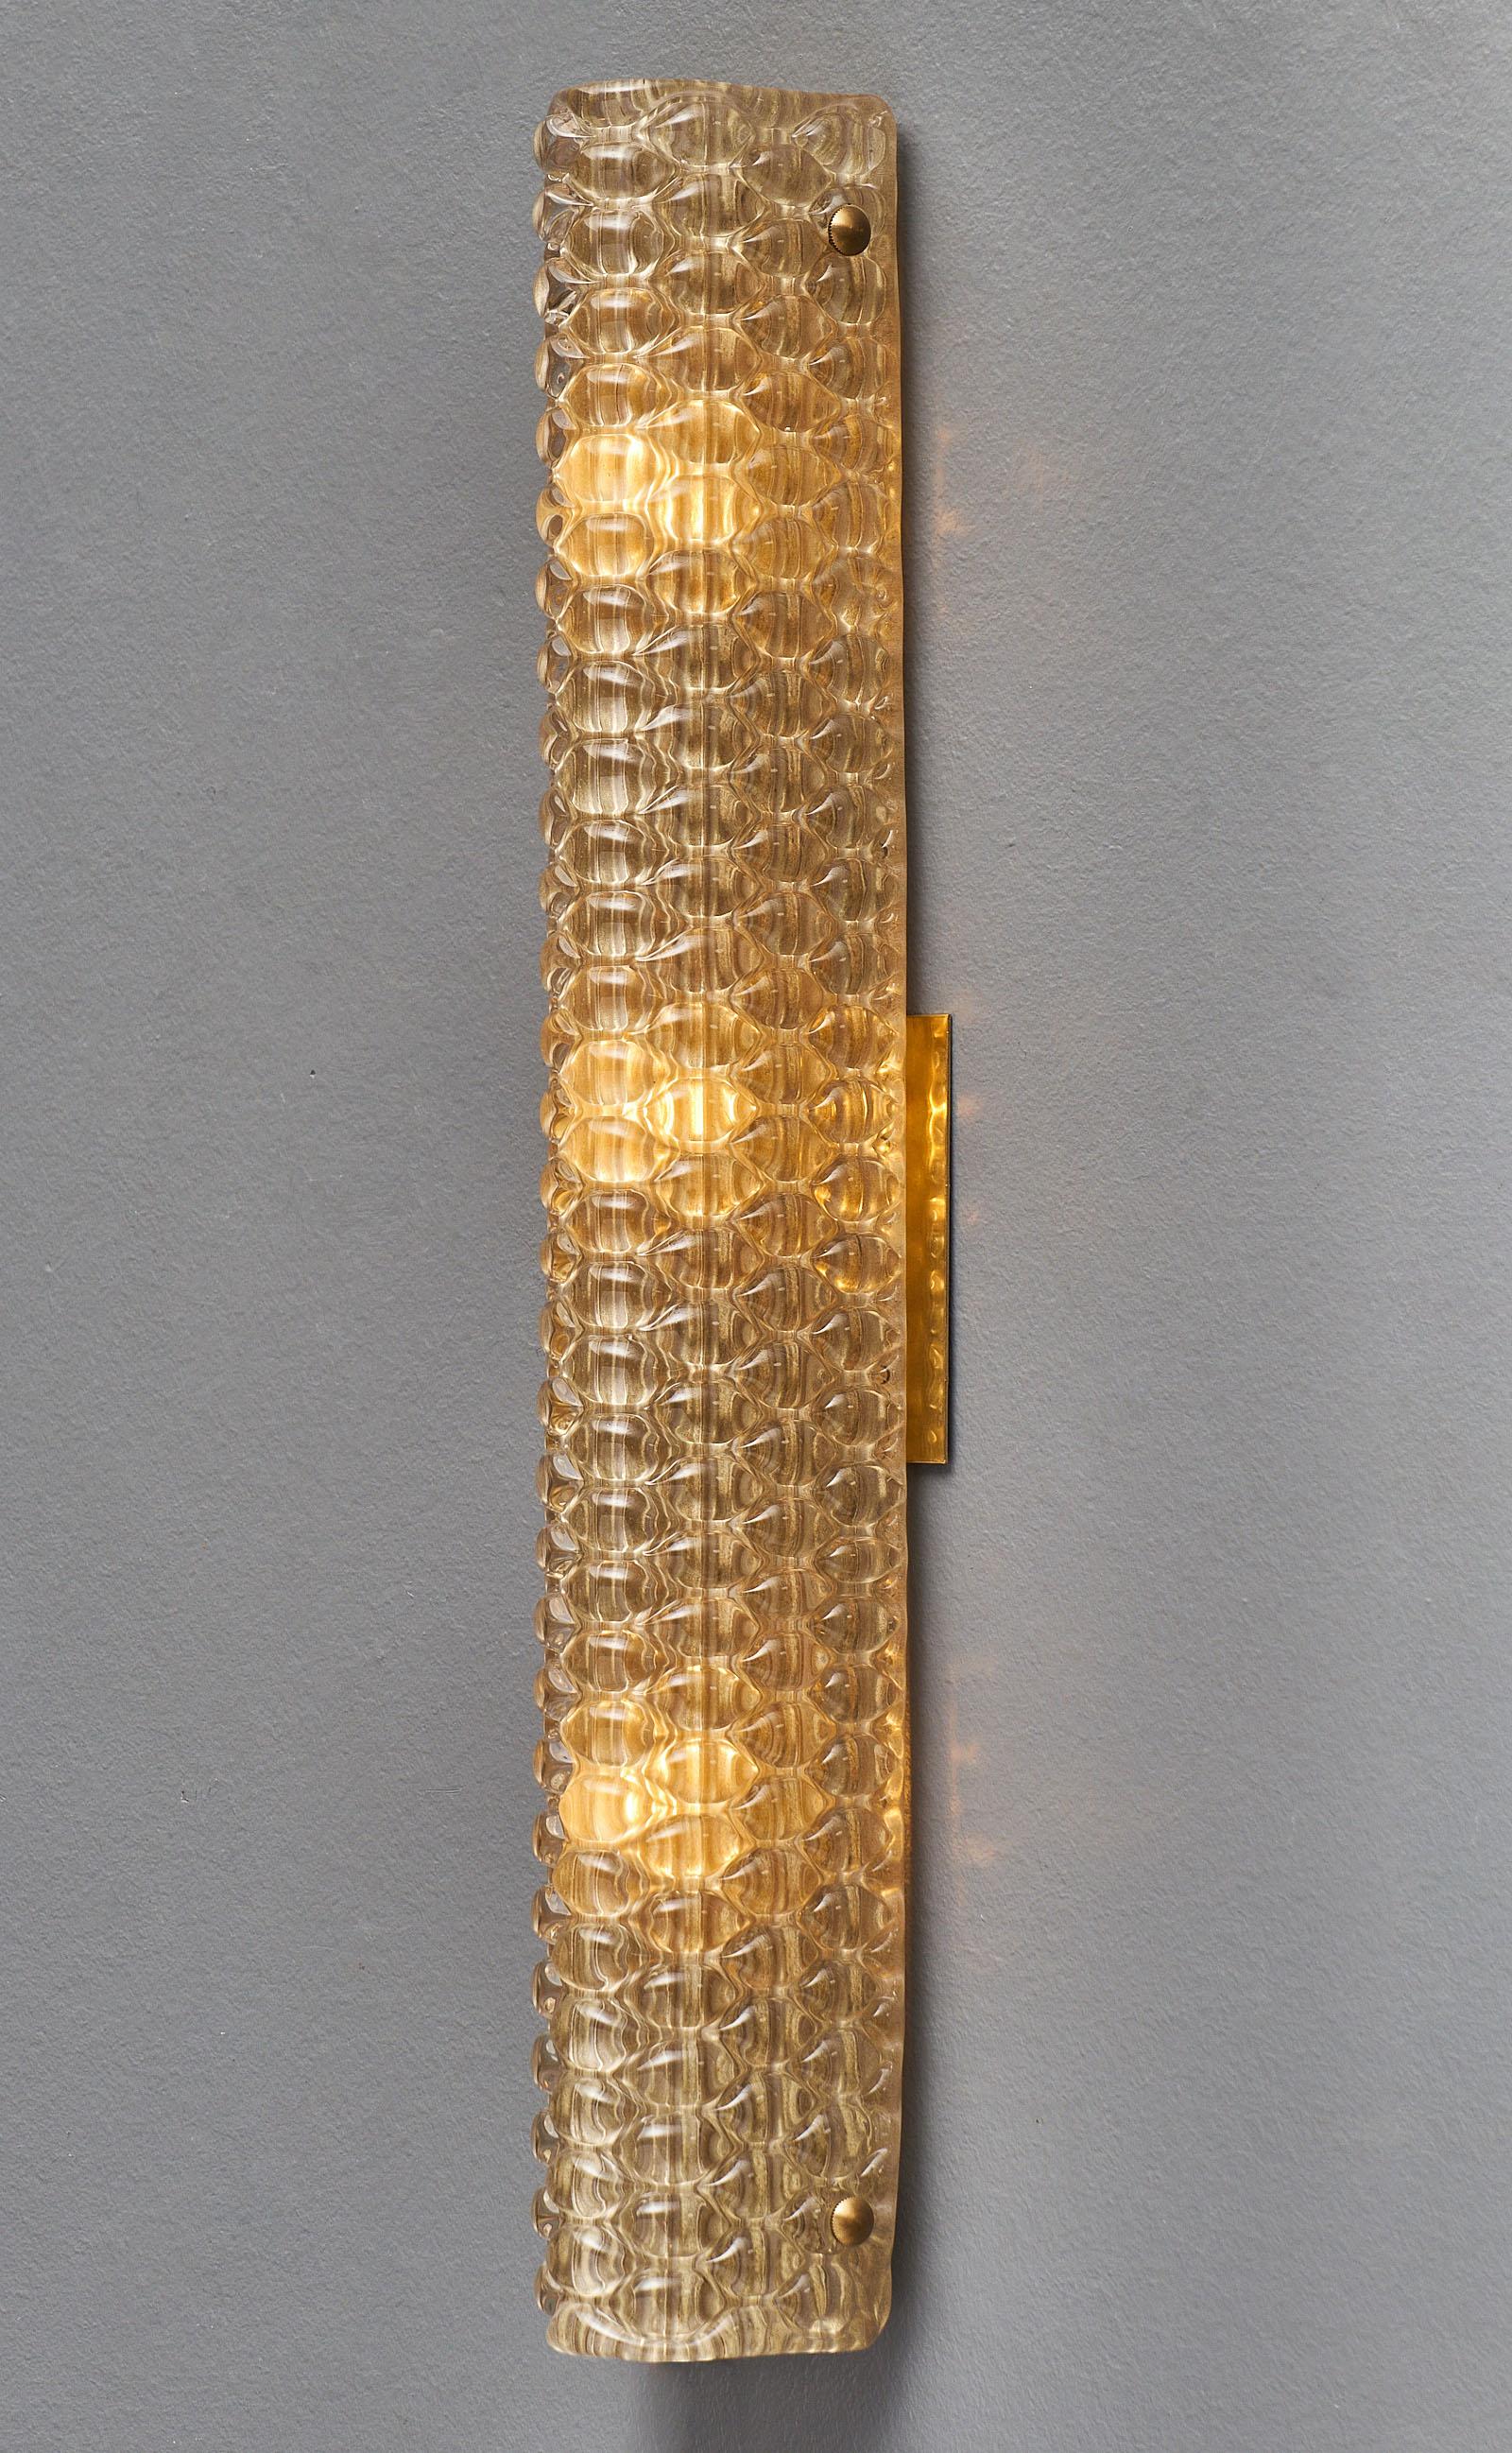 Murano glass modernist textured sconces with a python skin style pattern to the hand blown glass. We love the sleek style of this pair. They have been newly wired to fit US standards.

This pair is a special order from our partners in Italy. Please